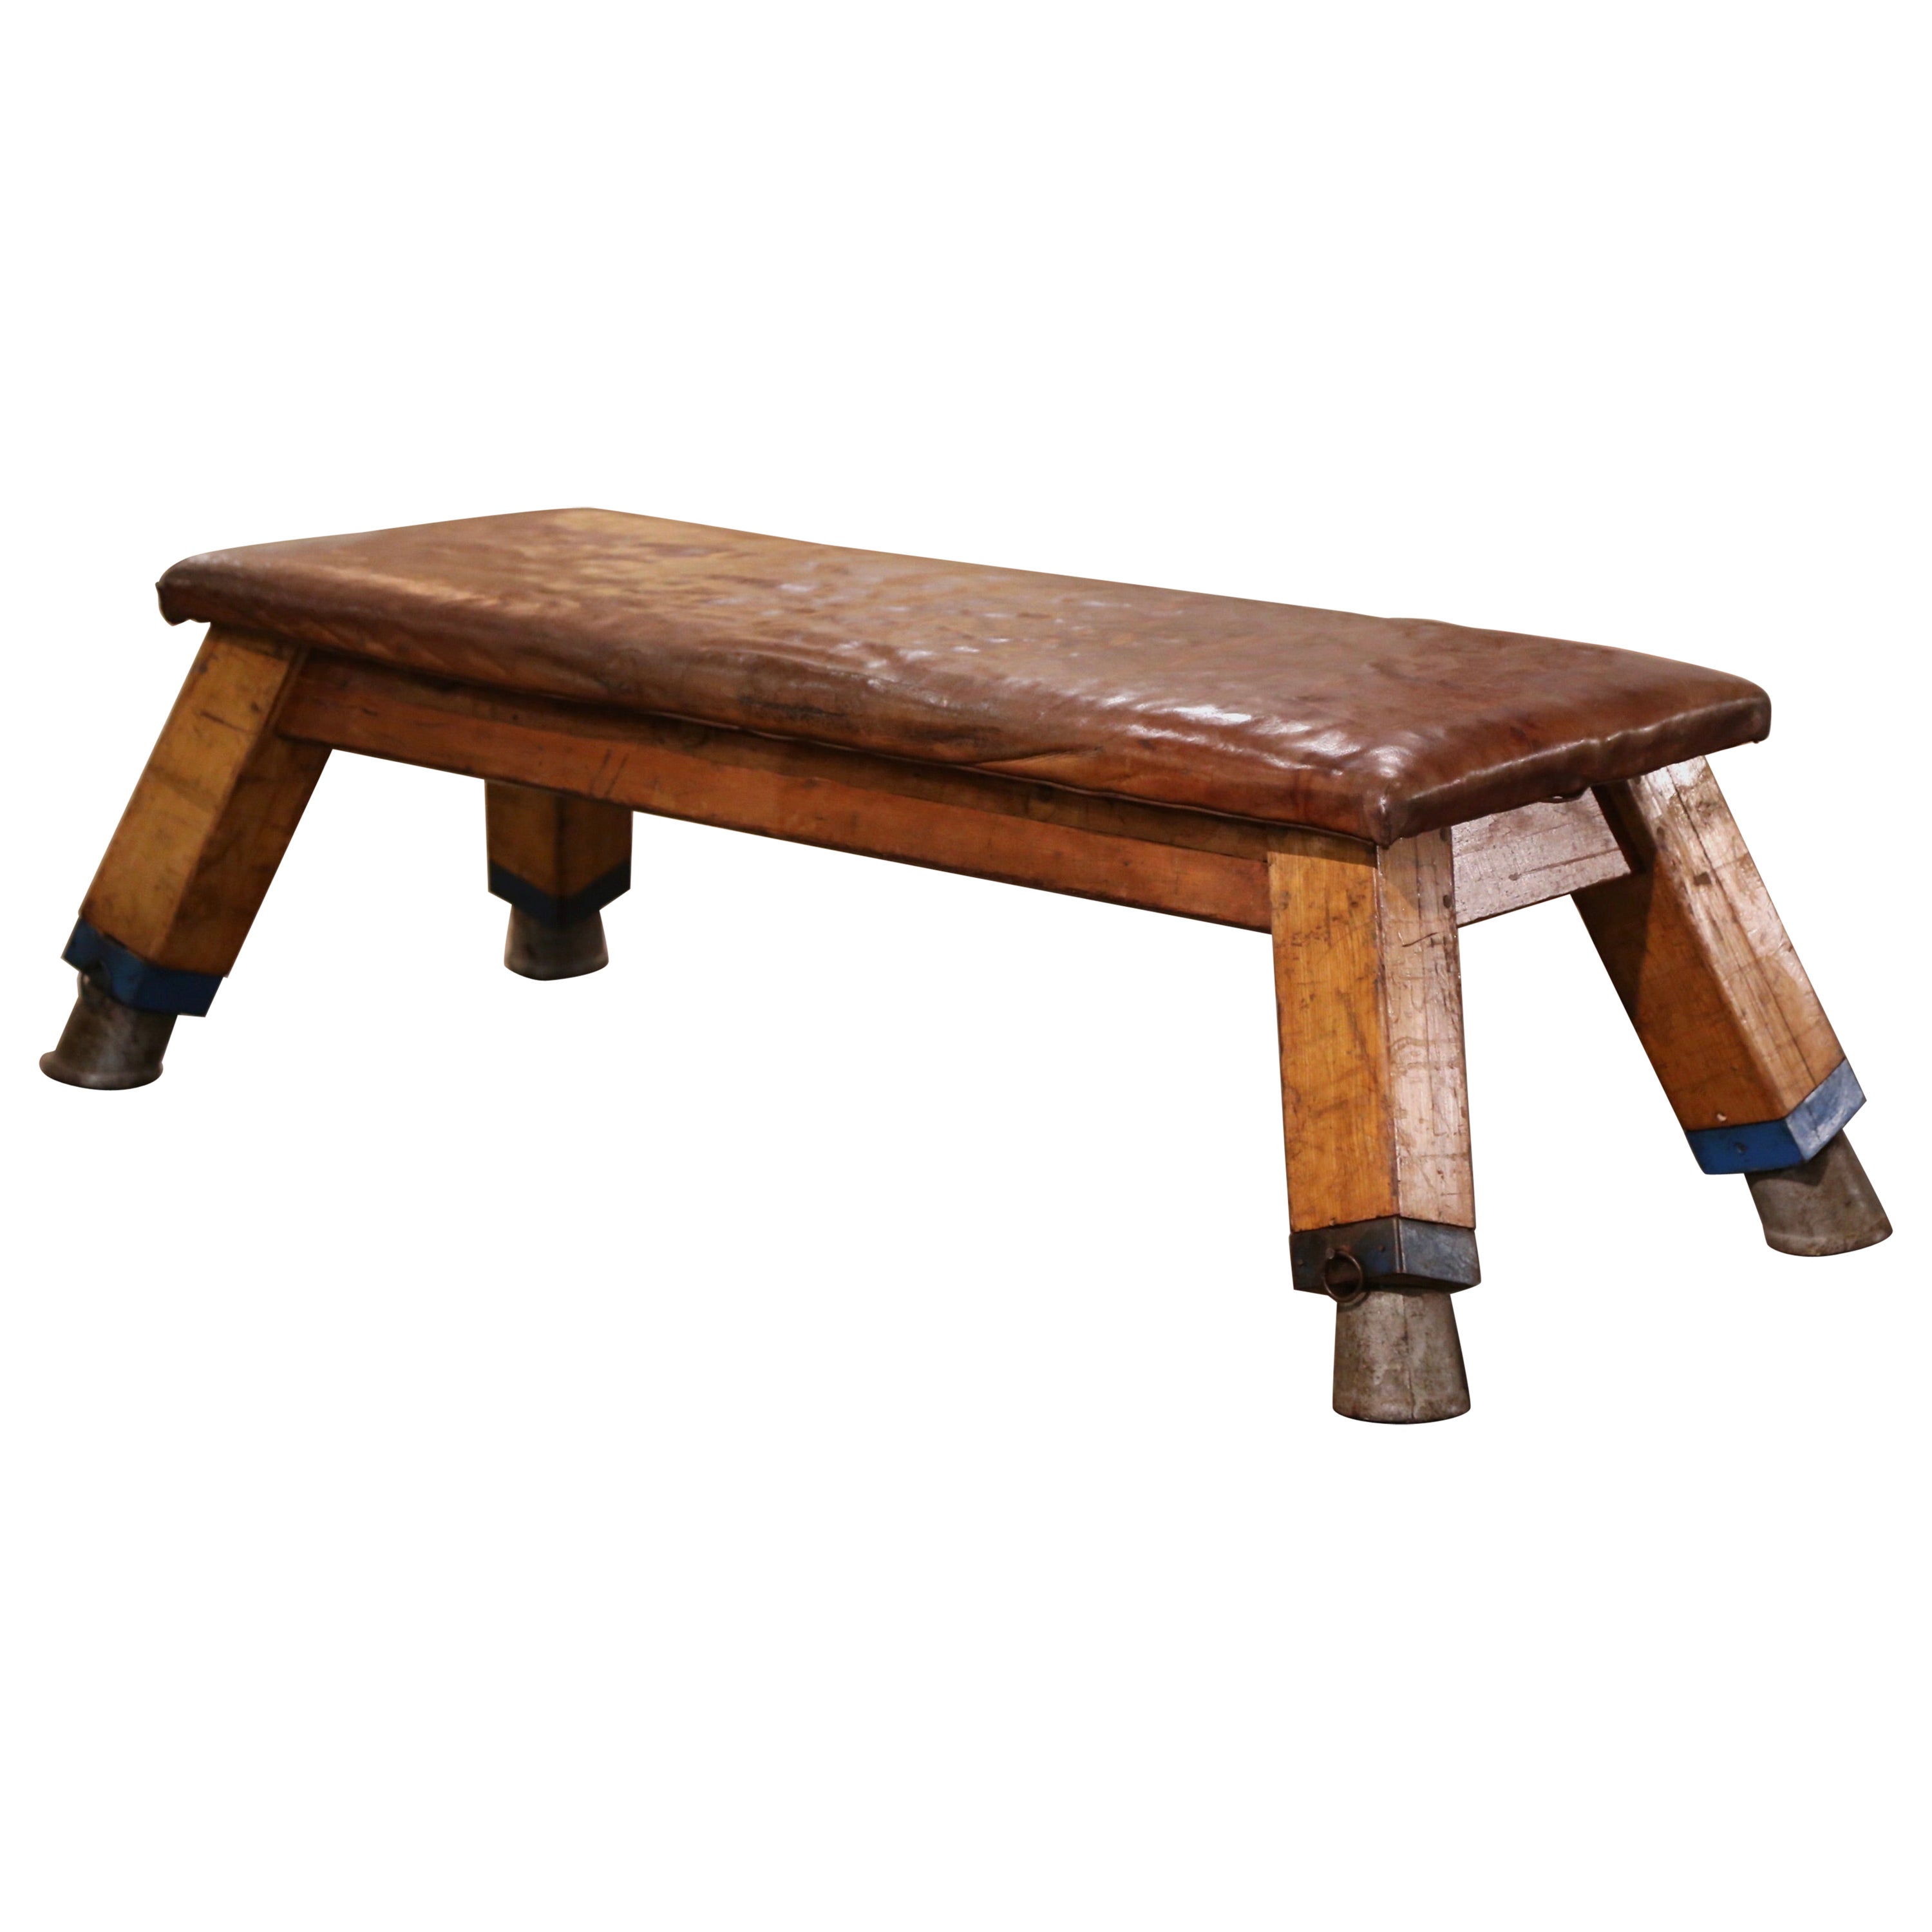 Early 20th Century Czech Tan Leather Top Pine Four-Leg Workout Training Bench